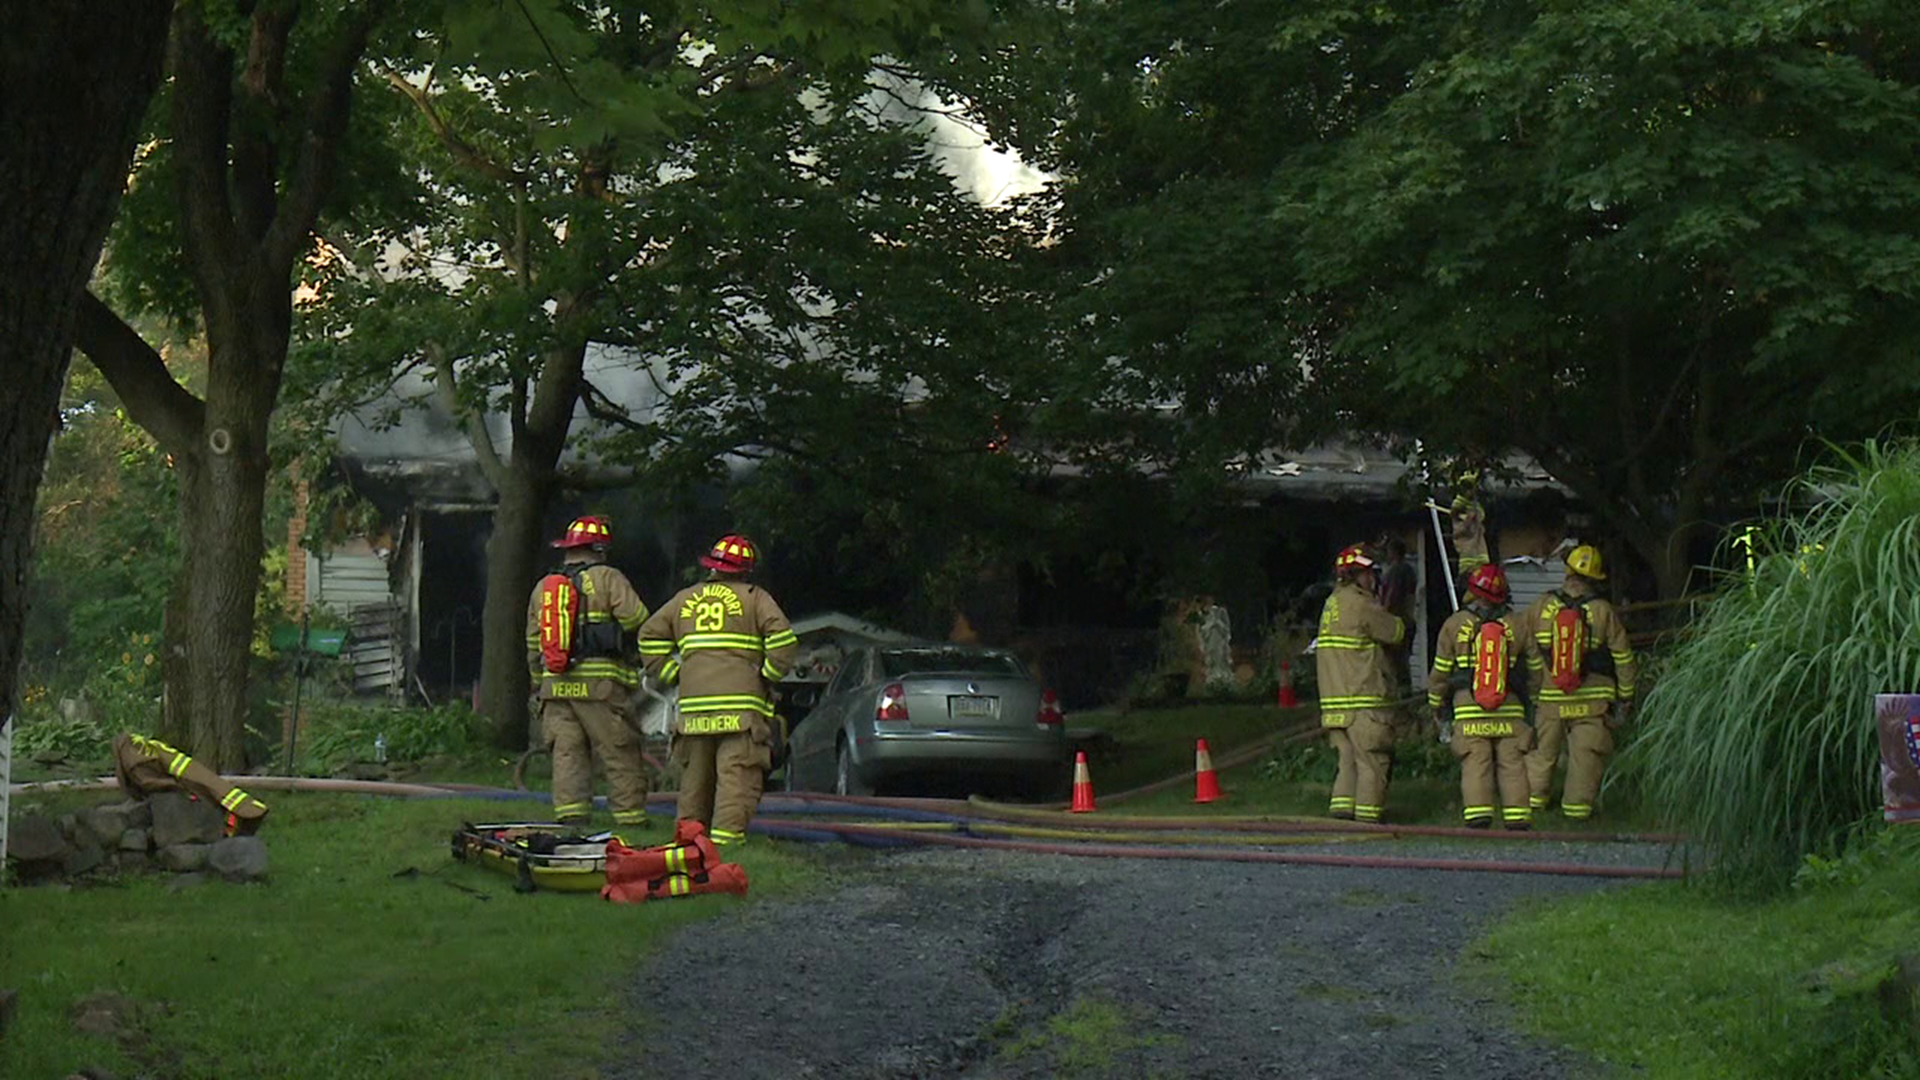 Flames forced an elderly couple from their home in Carbon County.